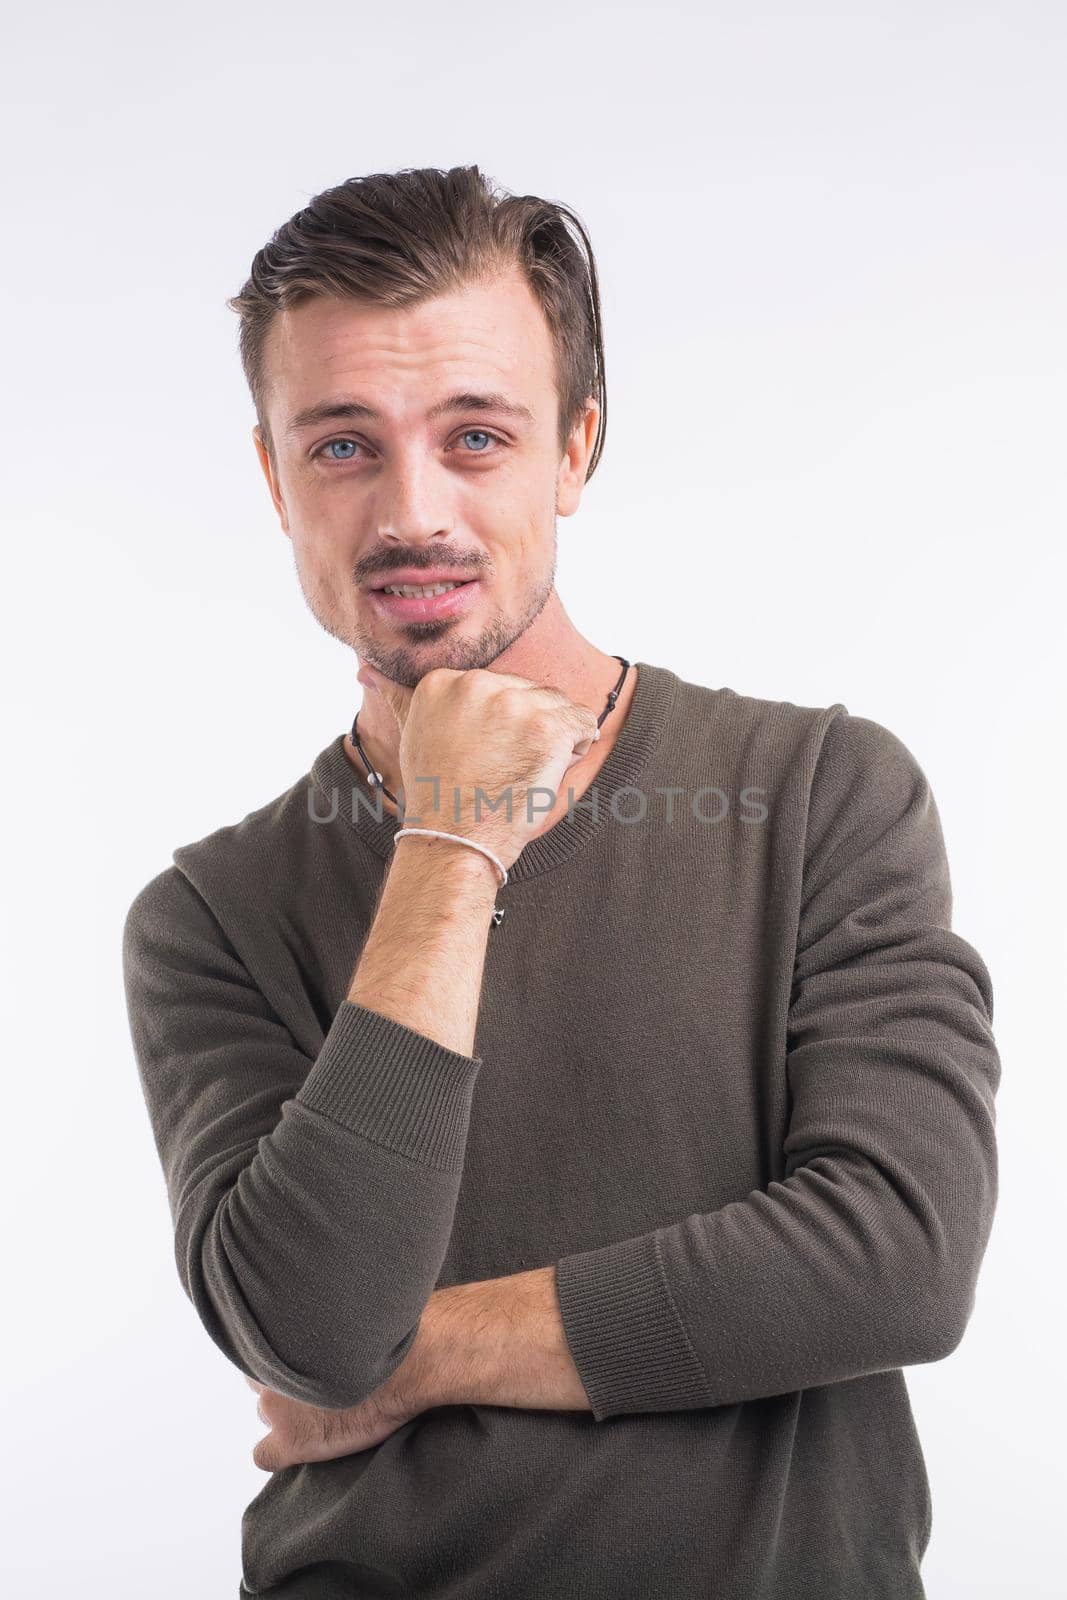 Thoughtful young man against white background.